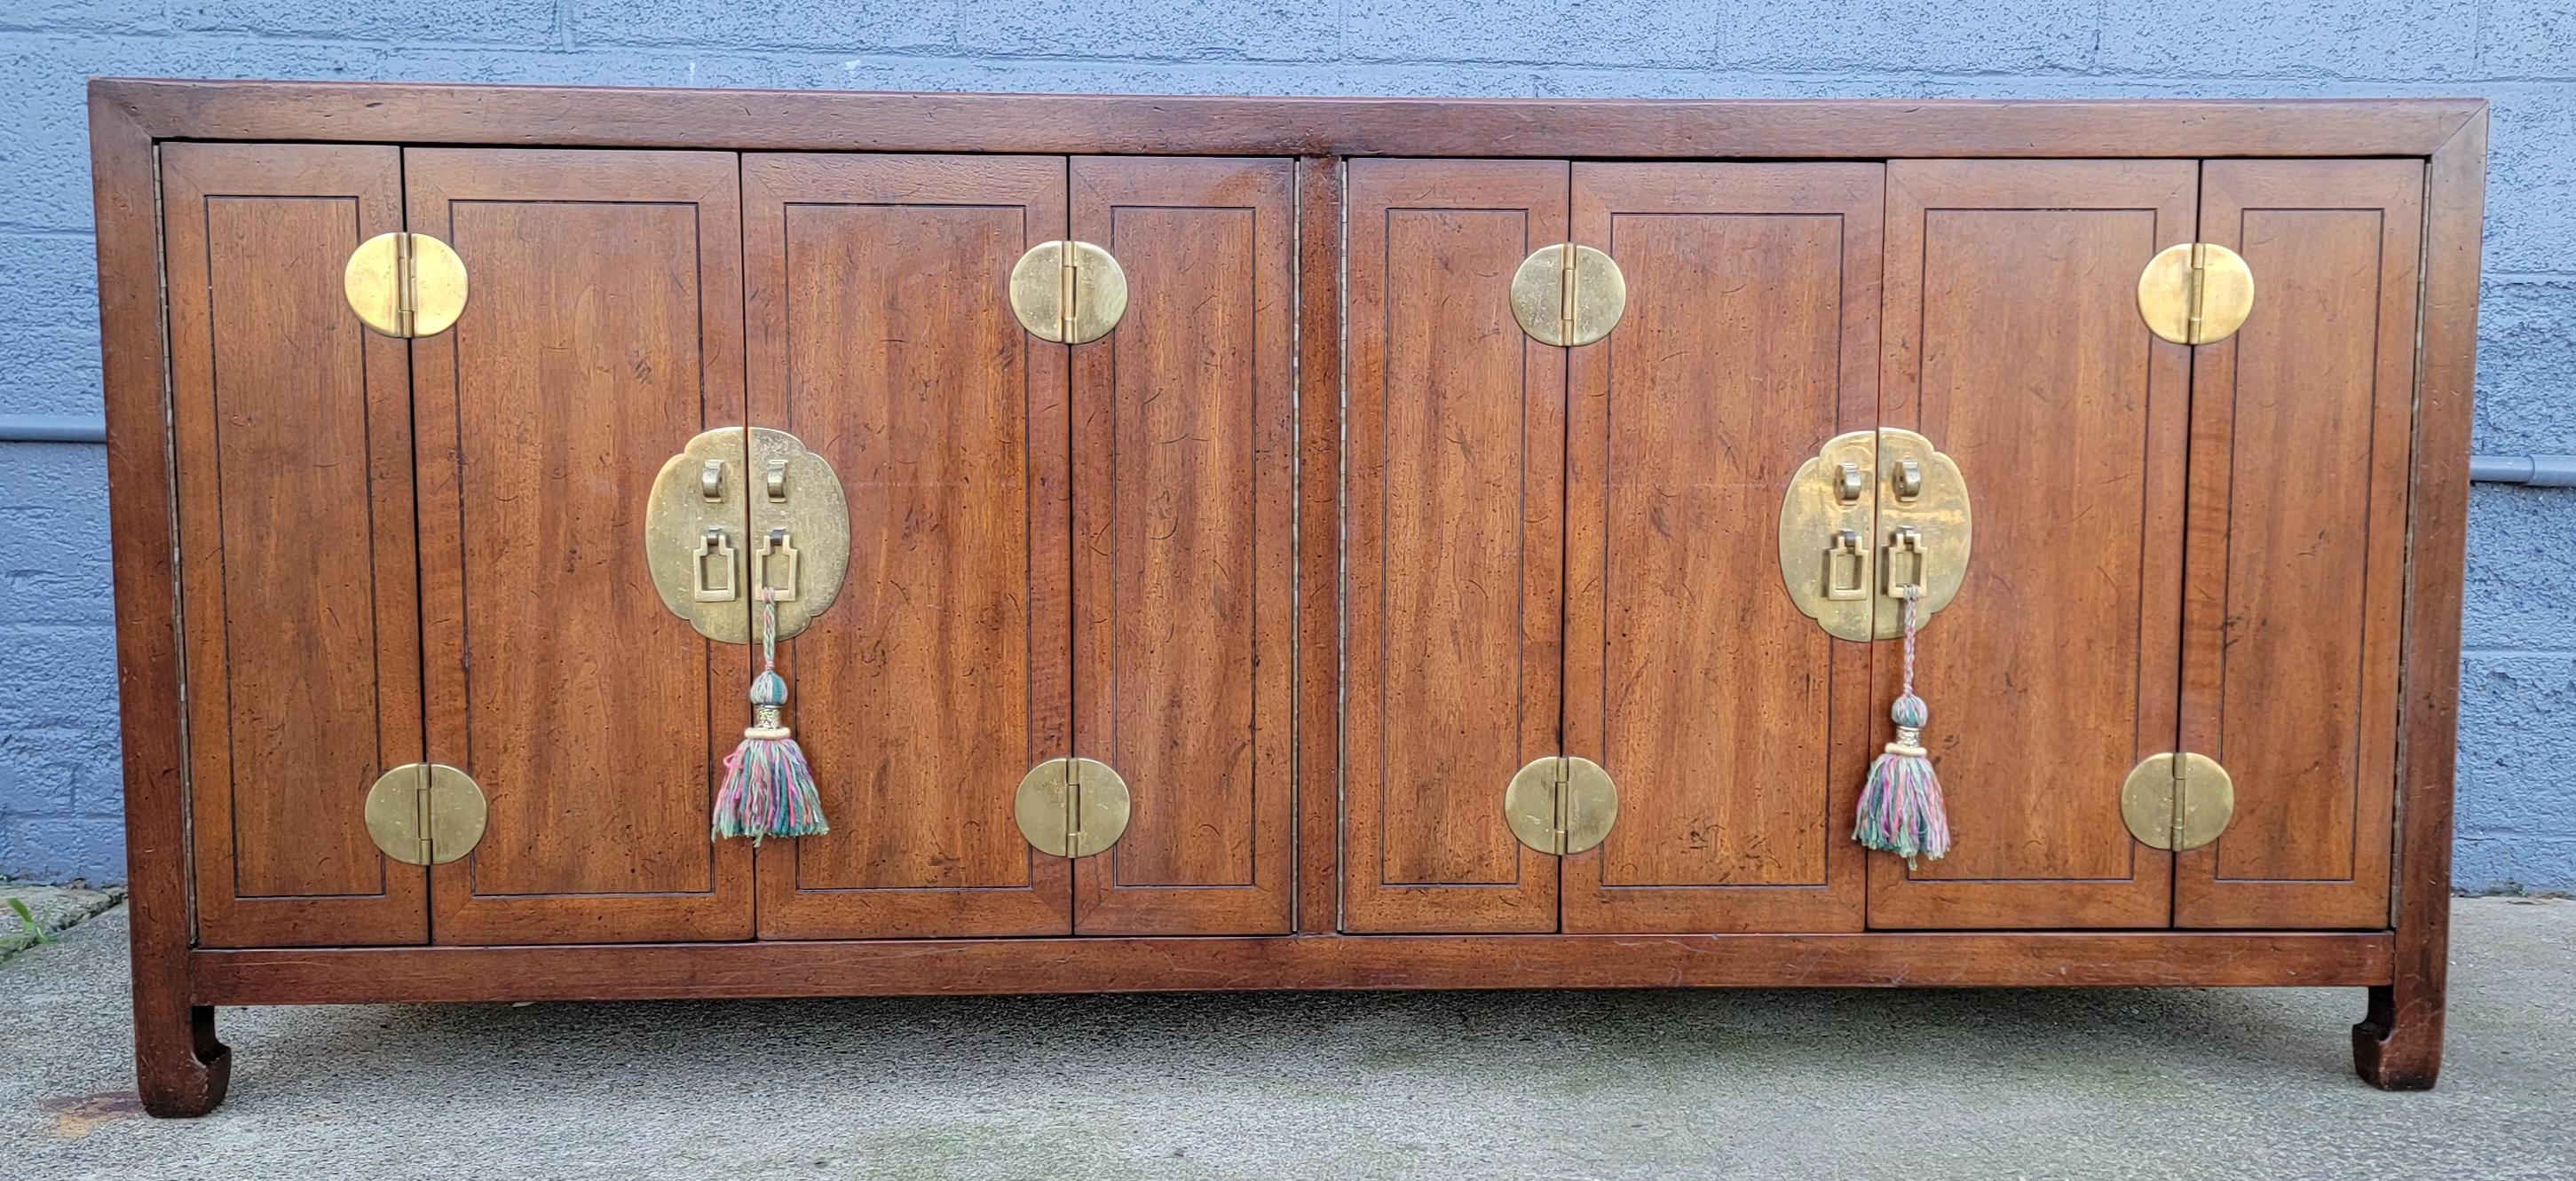 A finely crafted Asian influenced credenza by Henredon titled by maker 